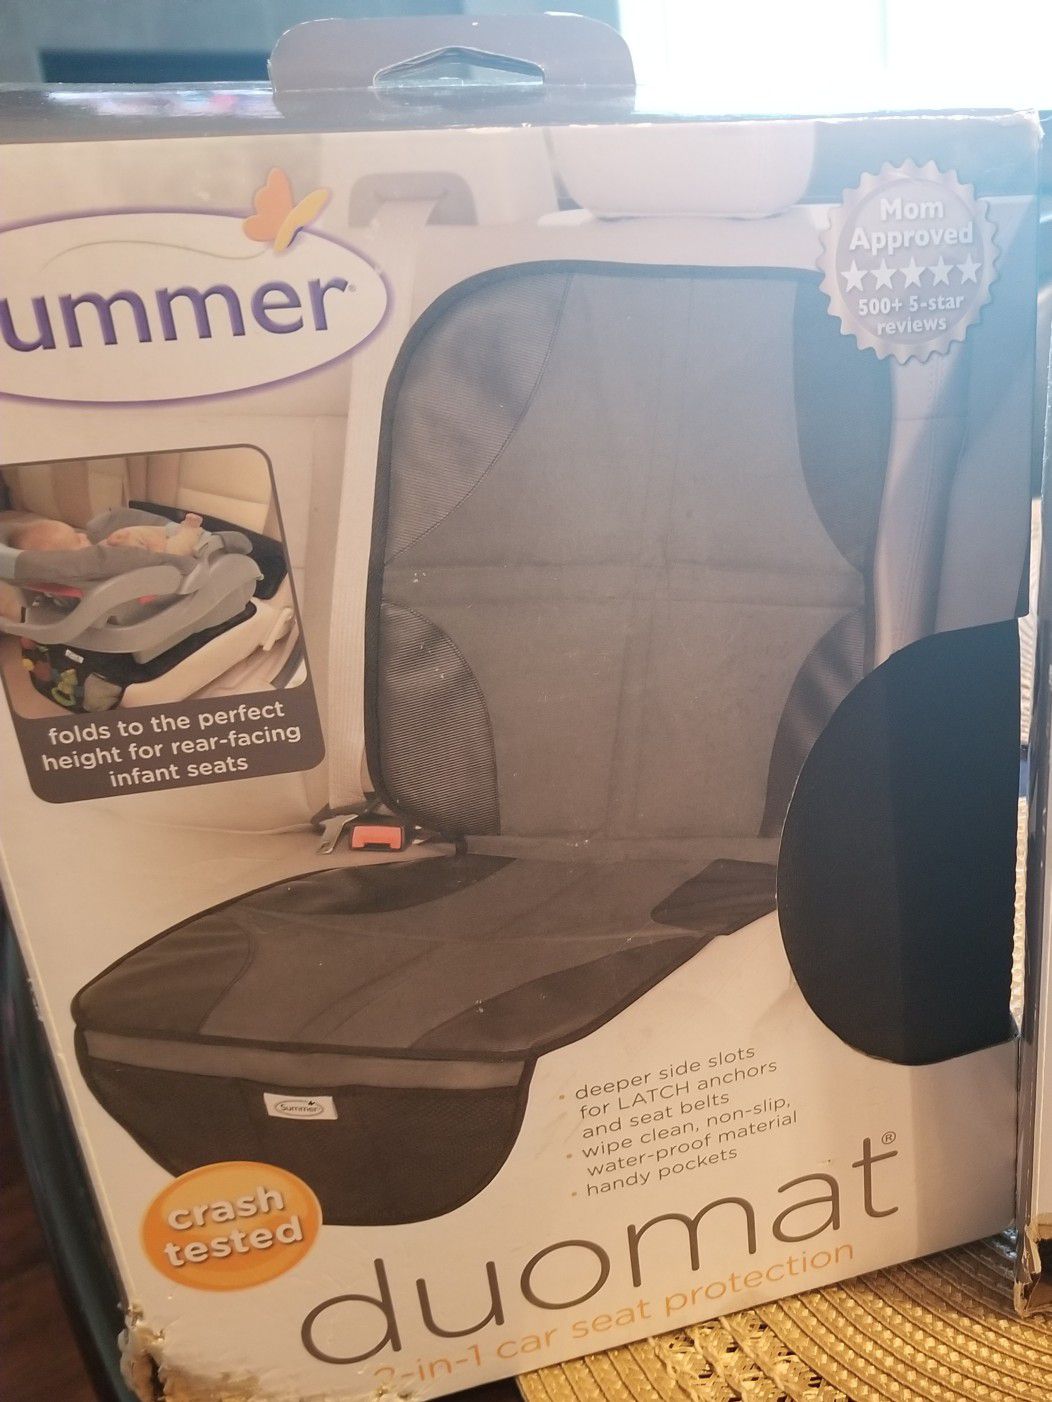 NEW TWO car seat protectors